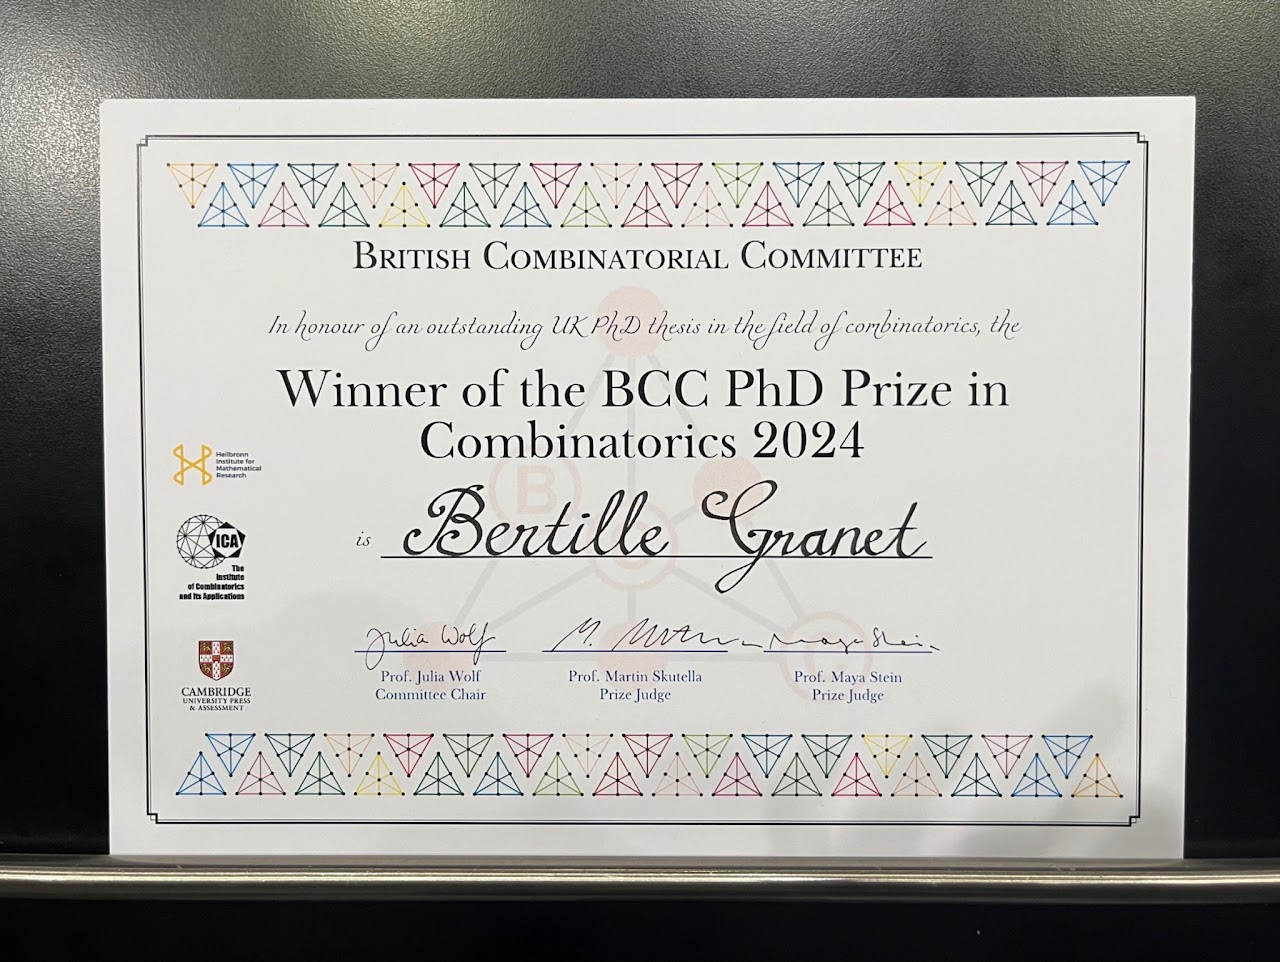 The certificate awarded to Bertille Granet as part of her prize